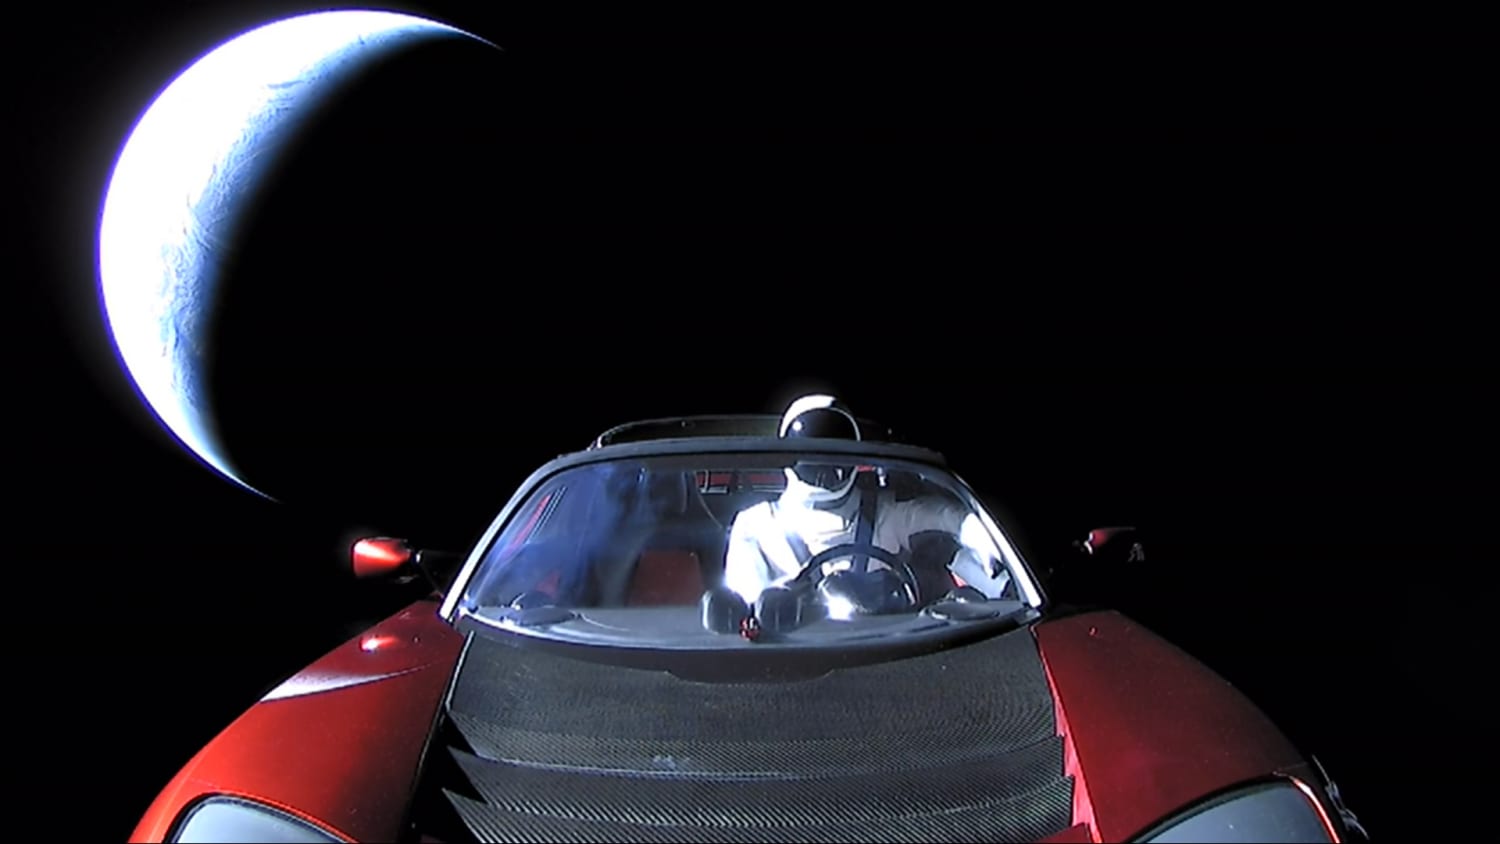 Starman And The Tesla Roadster That Spacex Launched Into Orbit Have Now Cruised Beyond Mars